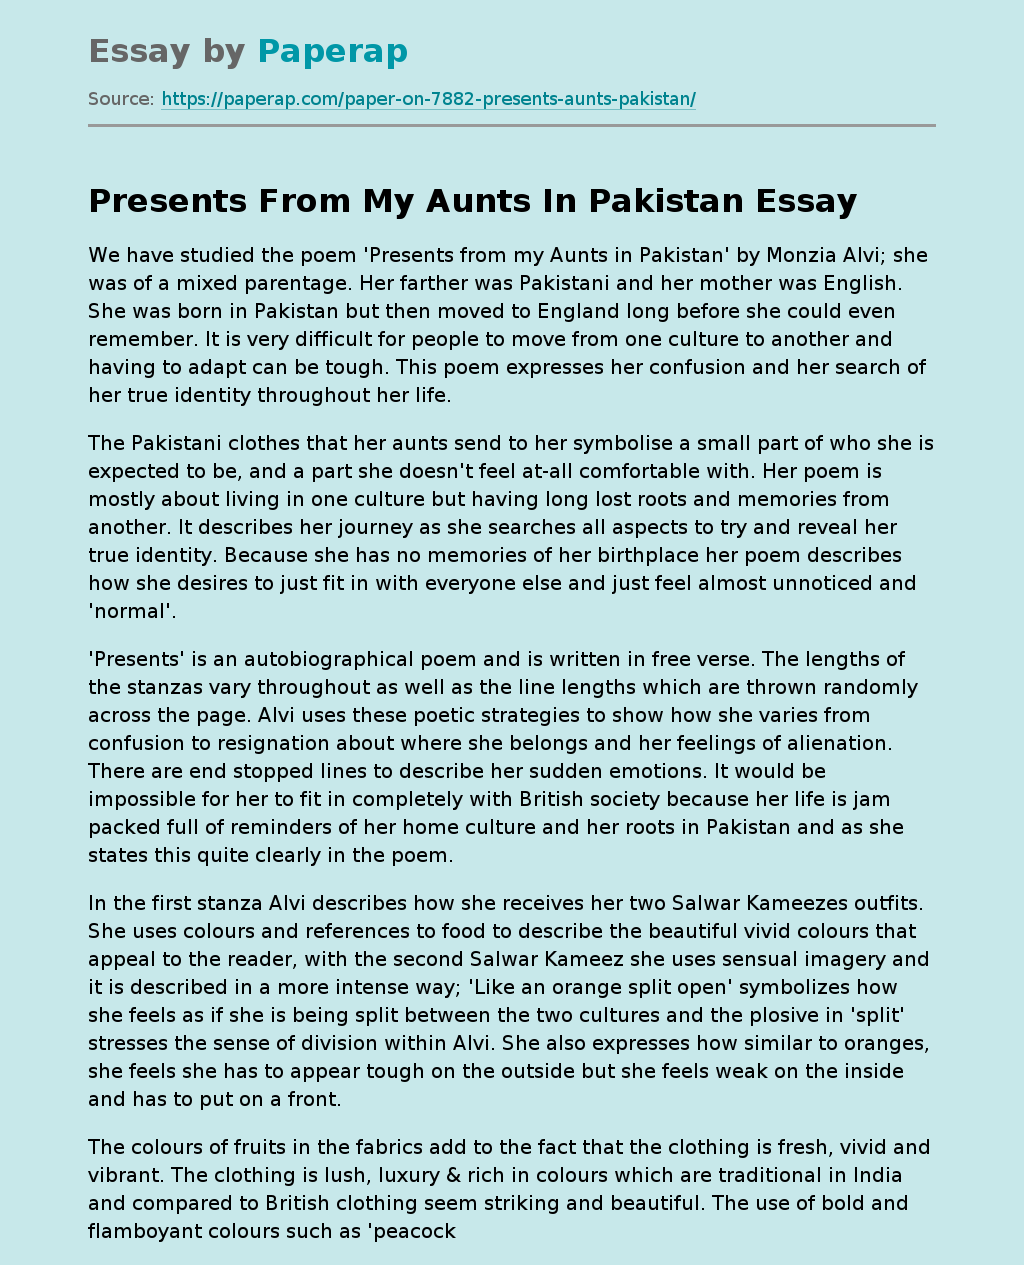 Mixed Heritage in 'Presents from my Aunts in Pakistan' by Moniza Alvi